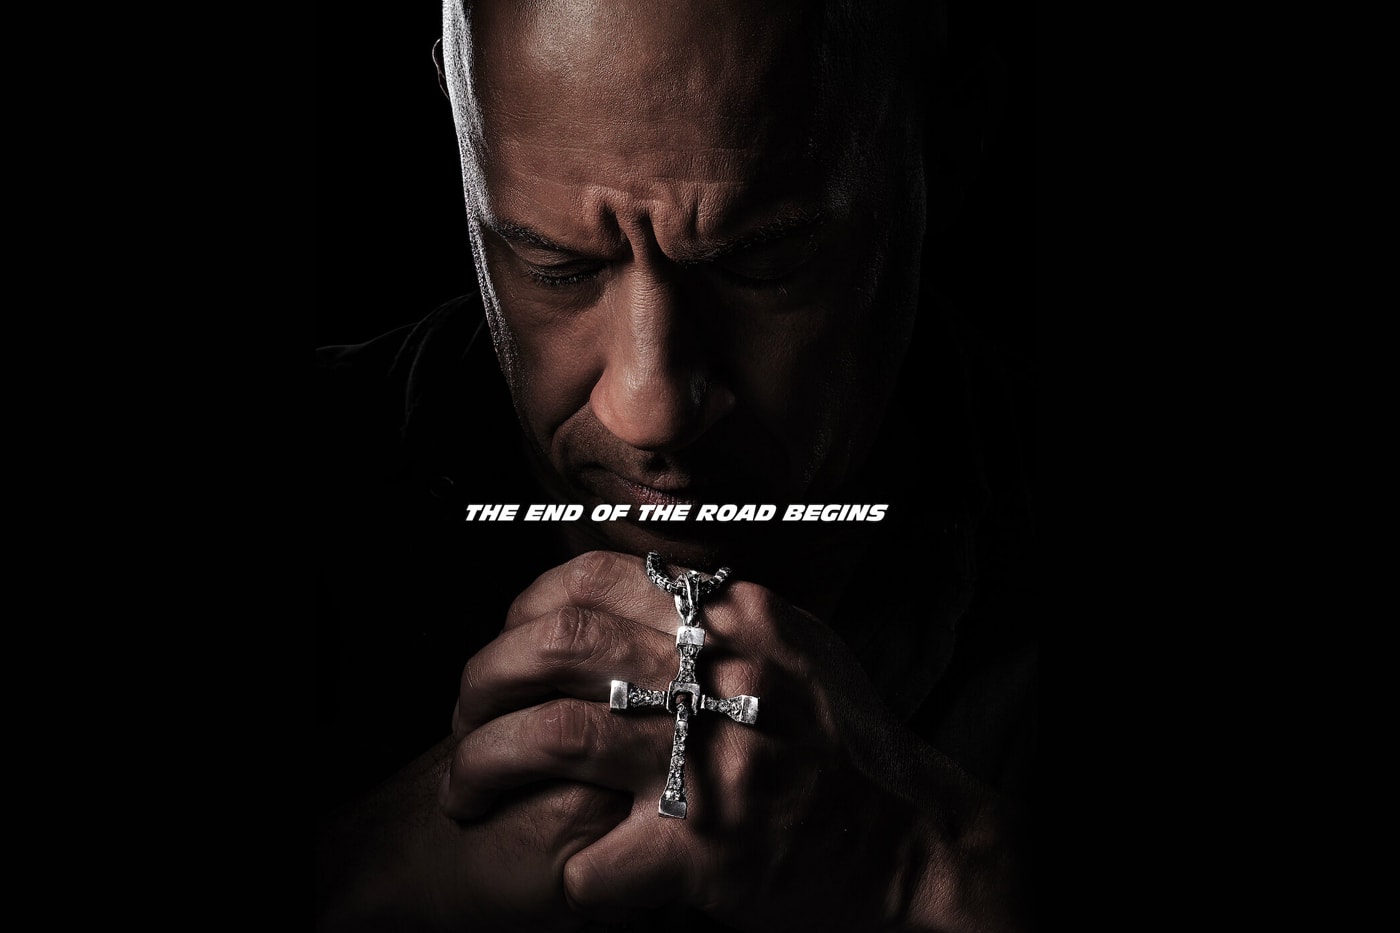 Fast and Furious x Vin Diesel trailer the end of the road begins poster cross pendant release date 